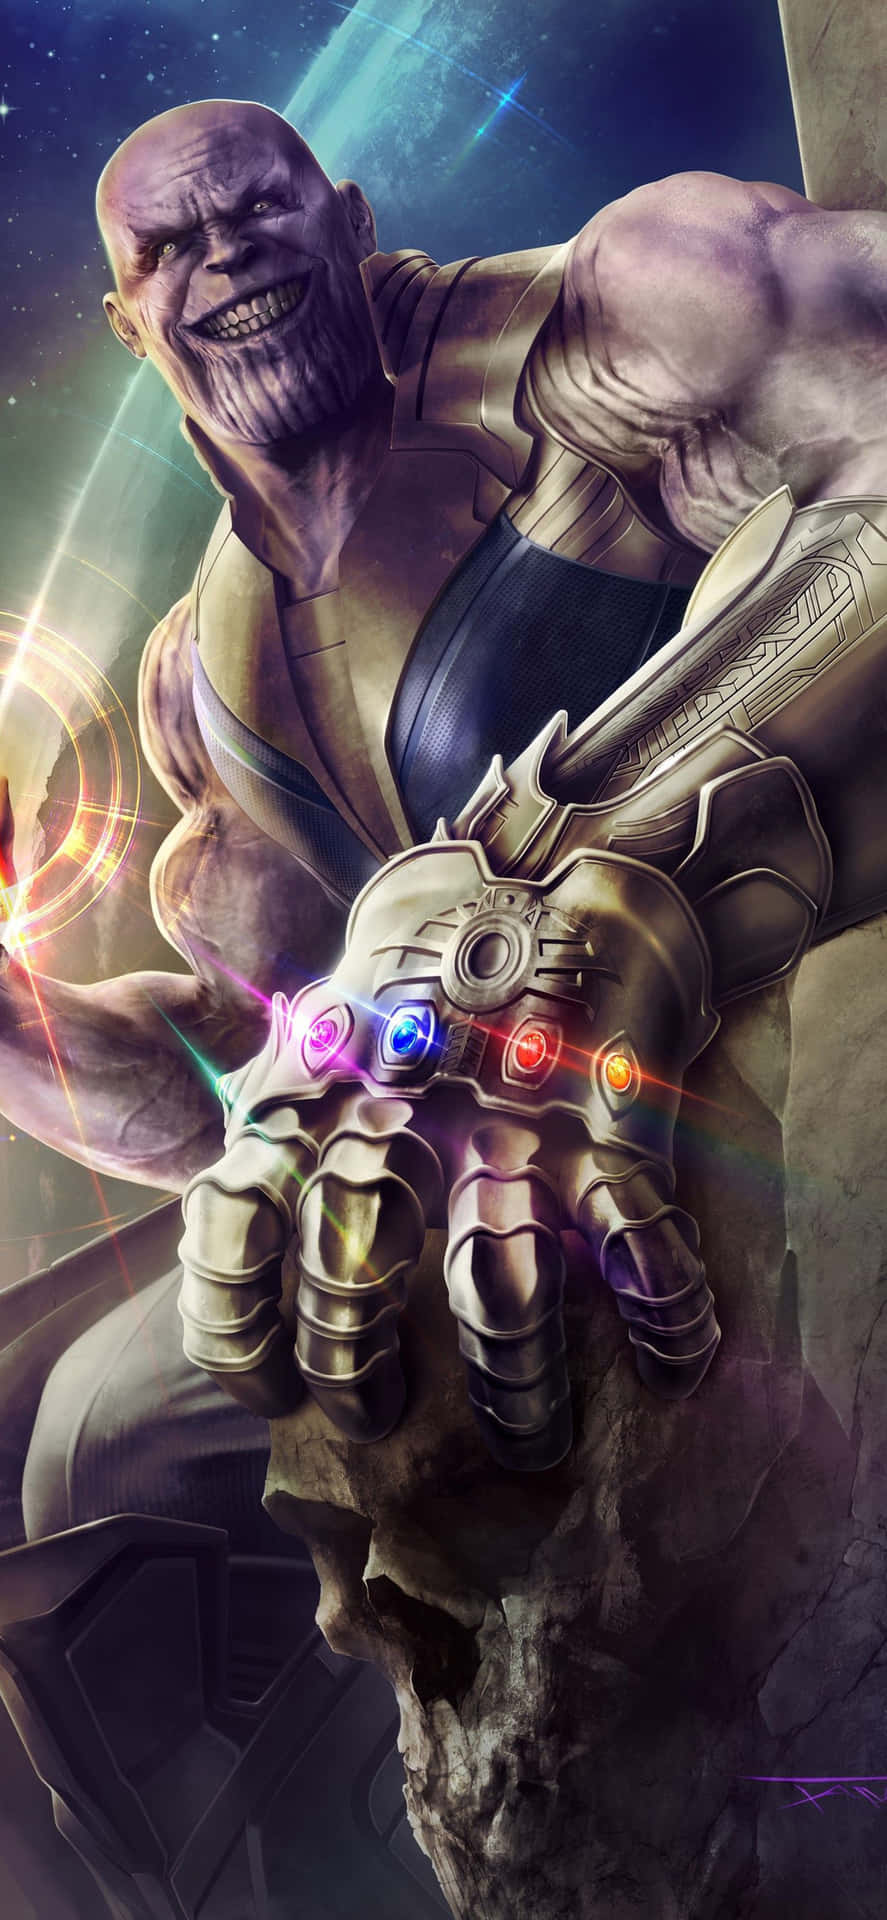 Marvel's Infinity Stones - Your Key to Unlimited Power Wallpaper